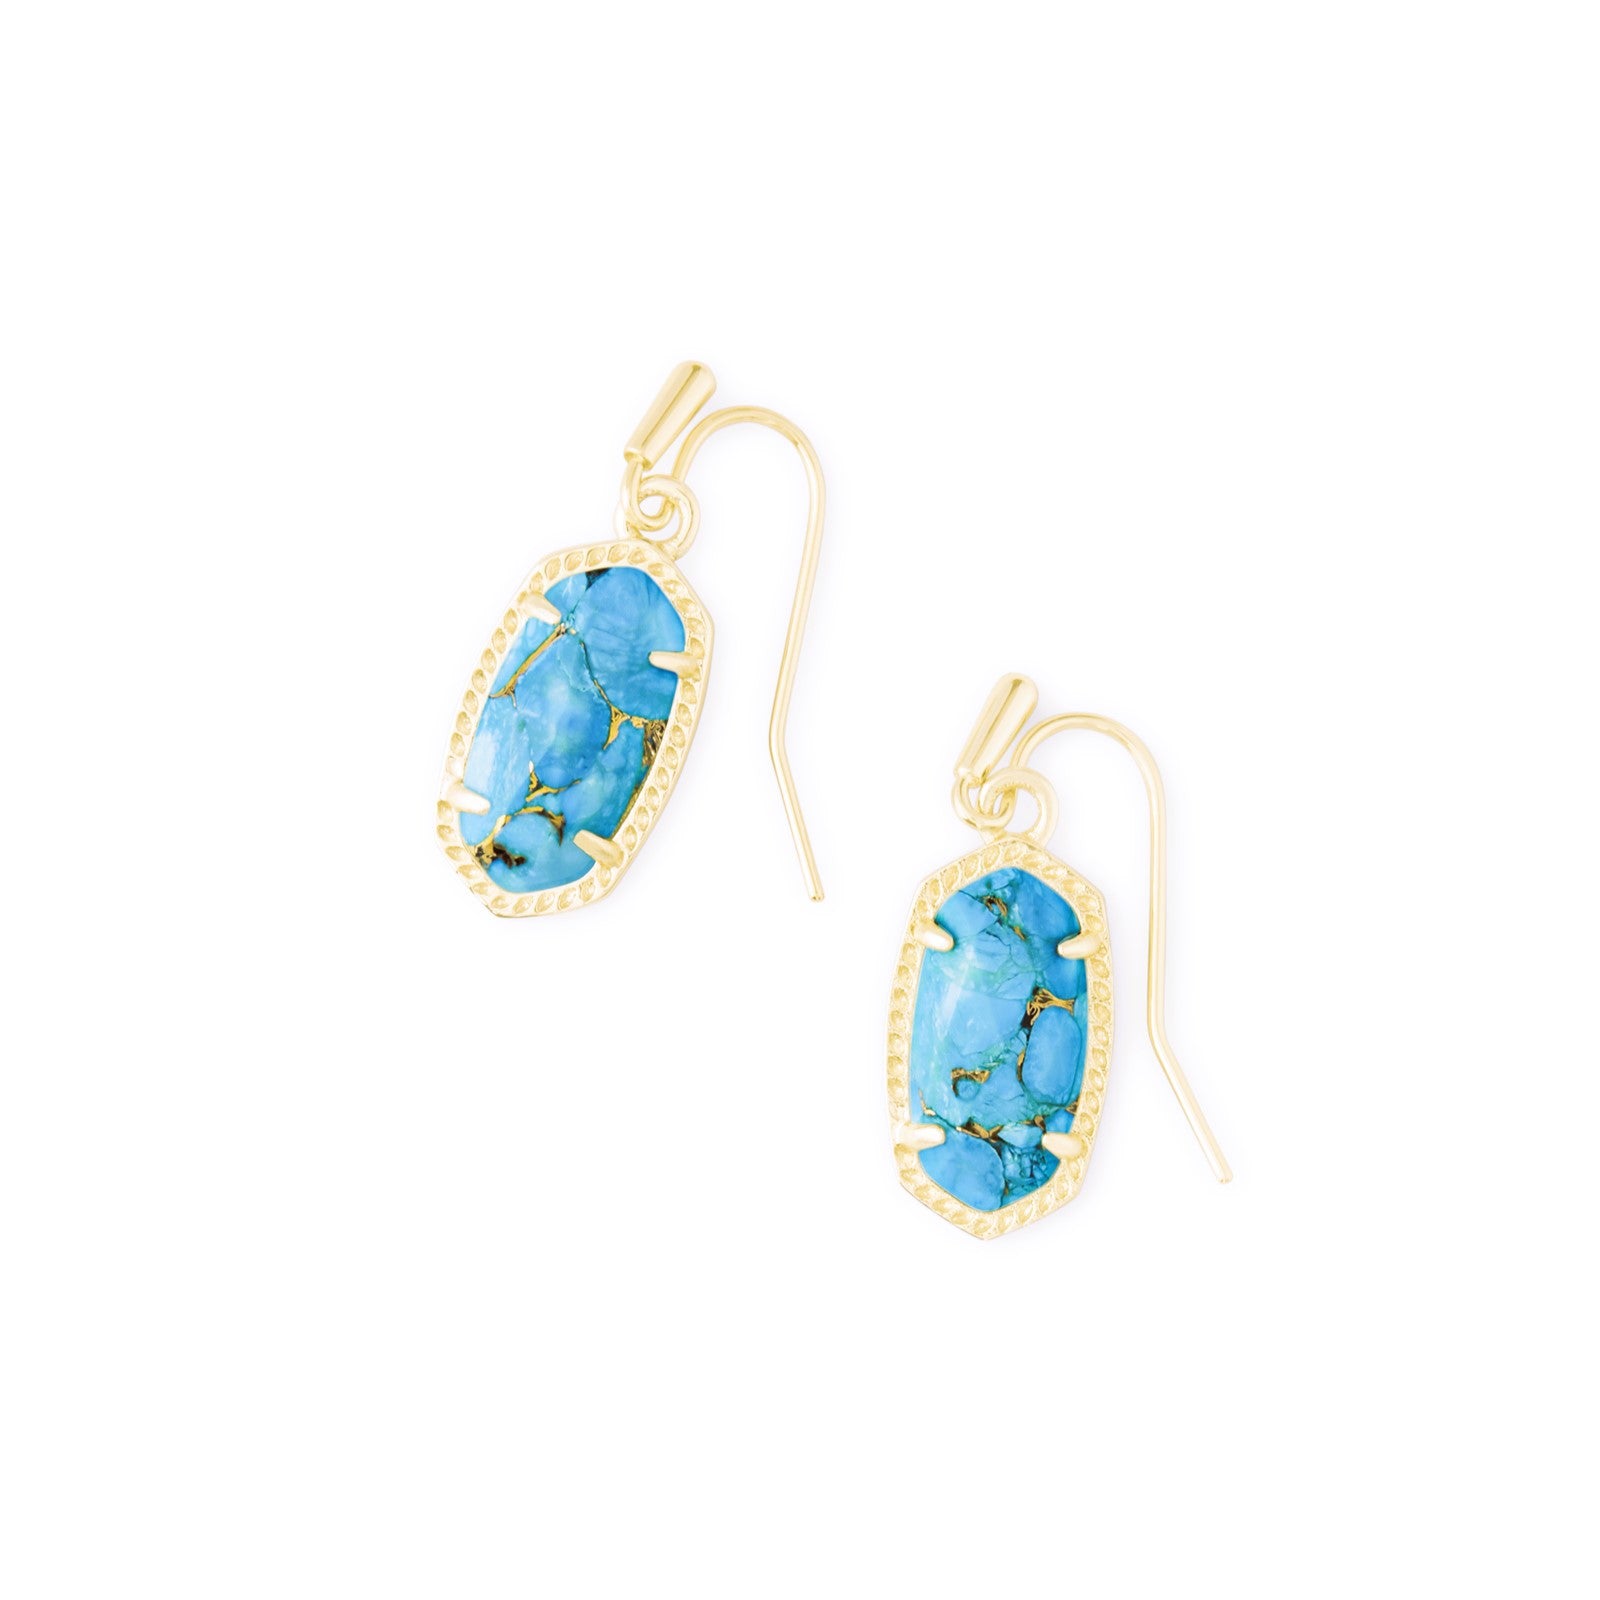 Kendra Scott | Lee Gold Earrings in Bronze Veined Turquoise Magnesite - Giddy Up Glamour Boutique